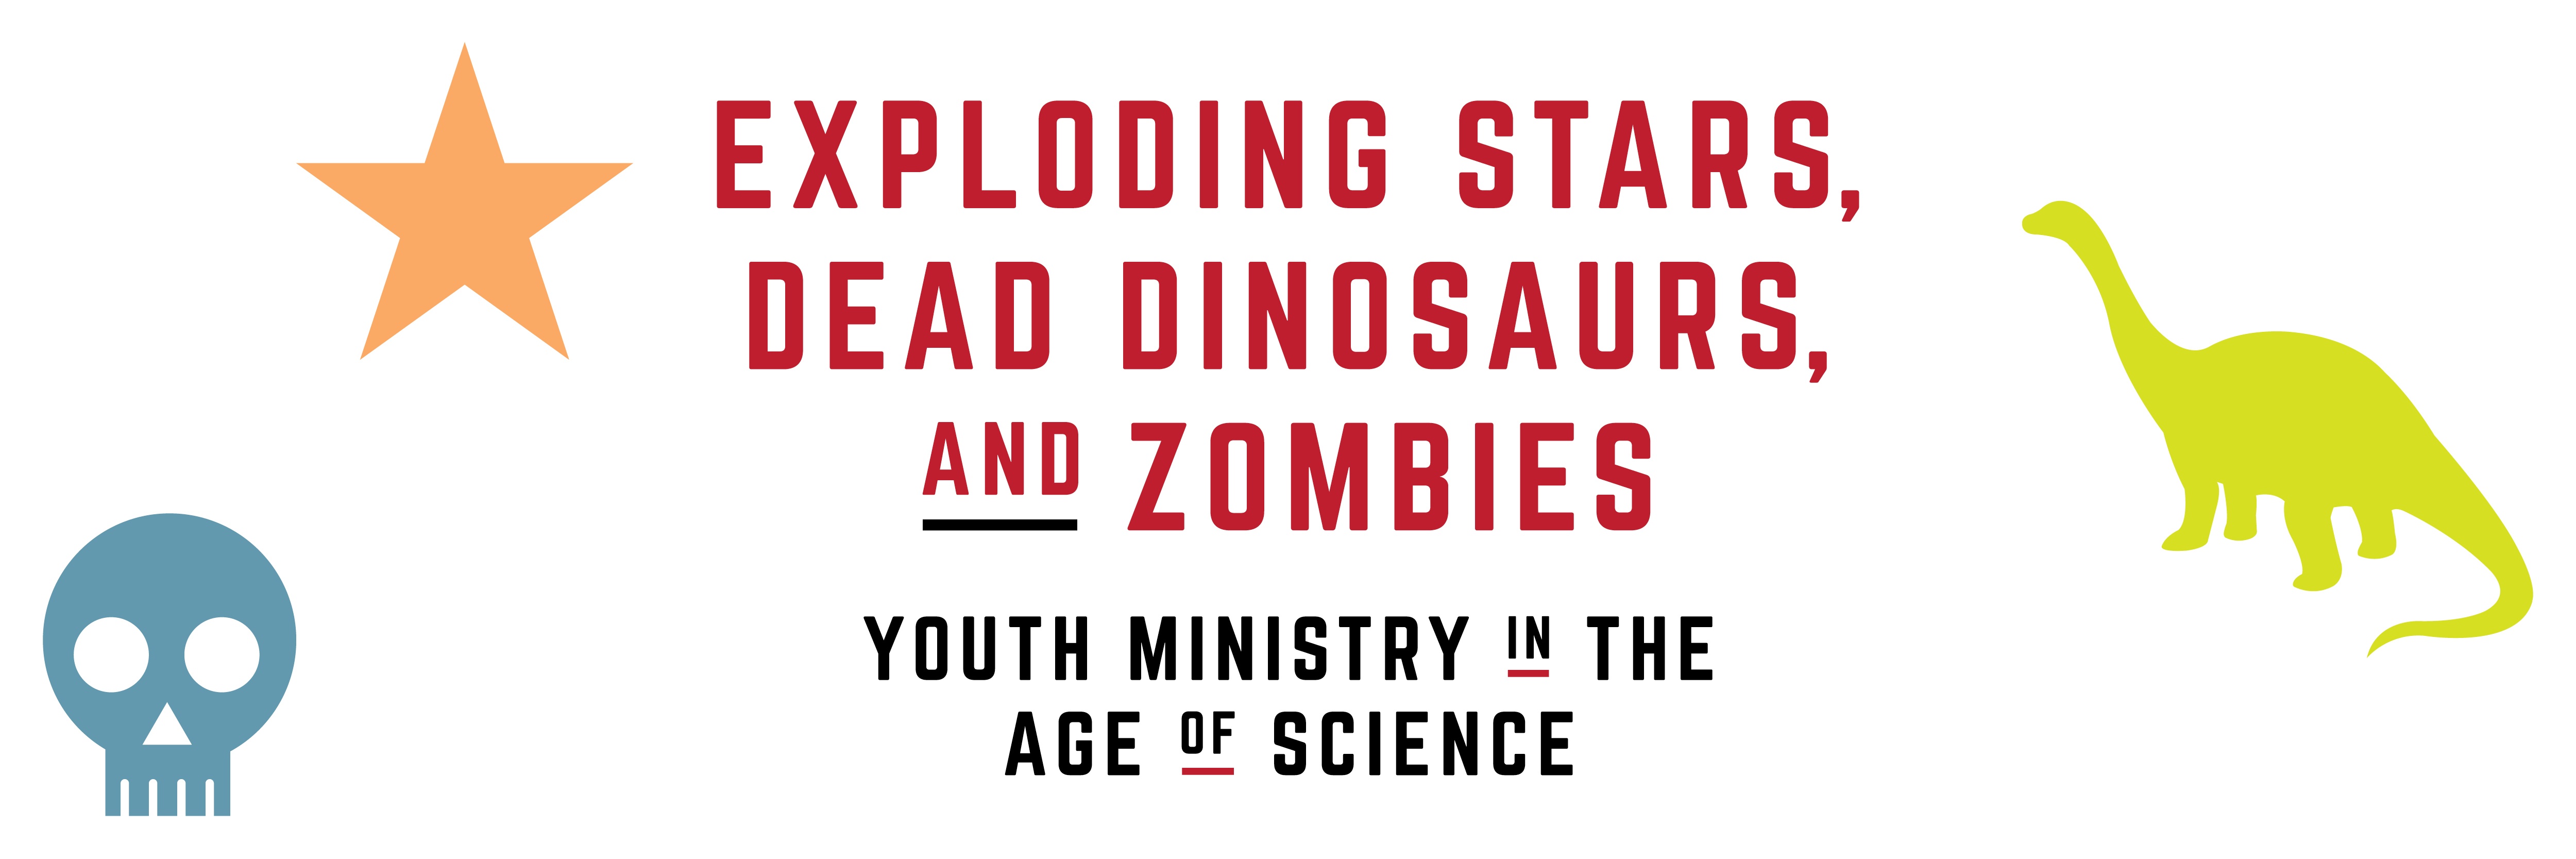 "Exploding Stars, Dead Dinosaurs, and Zombies" by Andrew Root | Sparkhouse Blog